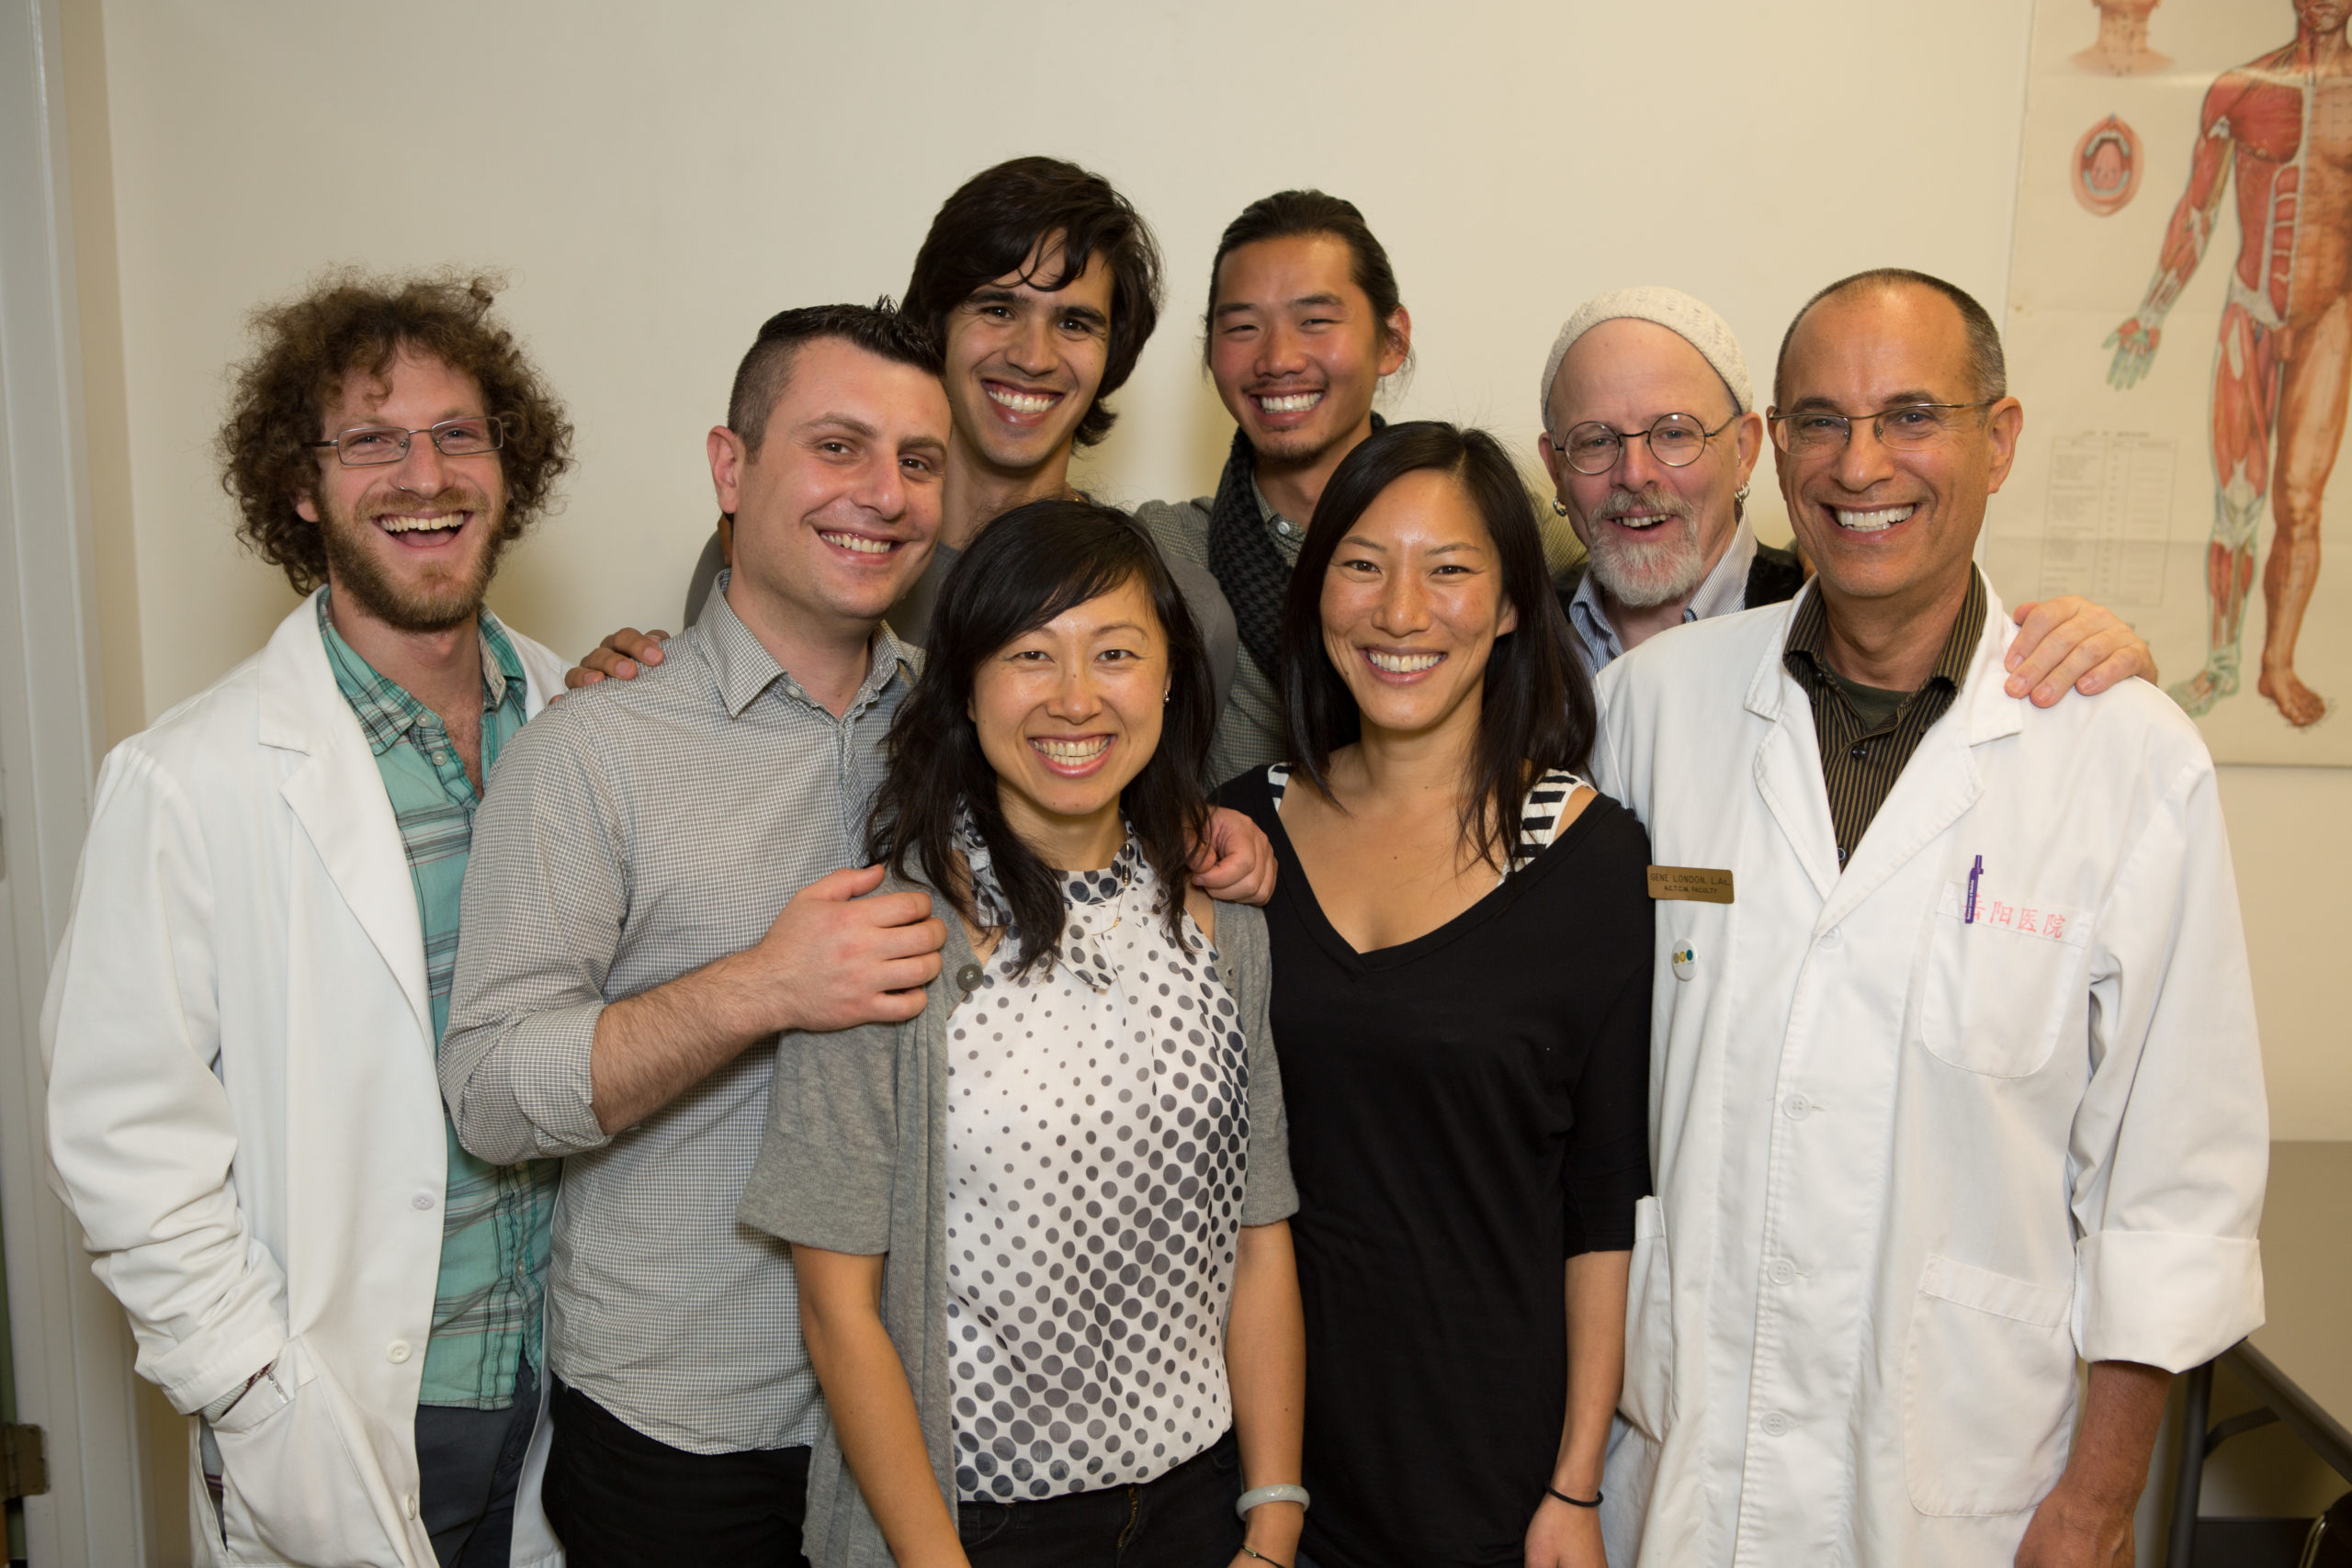 Acupuncture School Student Group in San Francisco, California